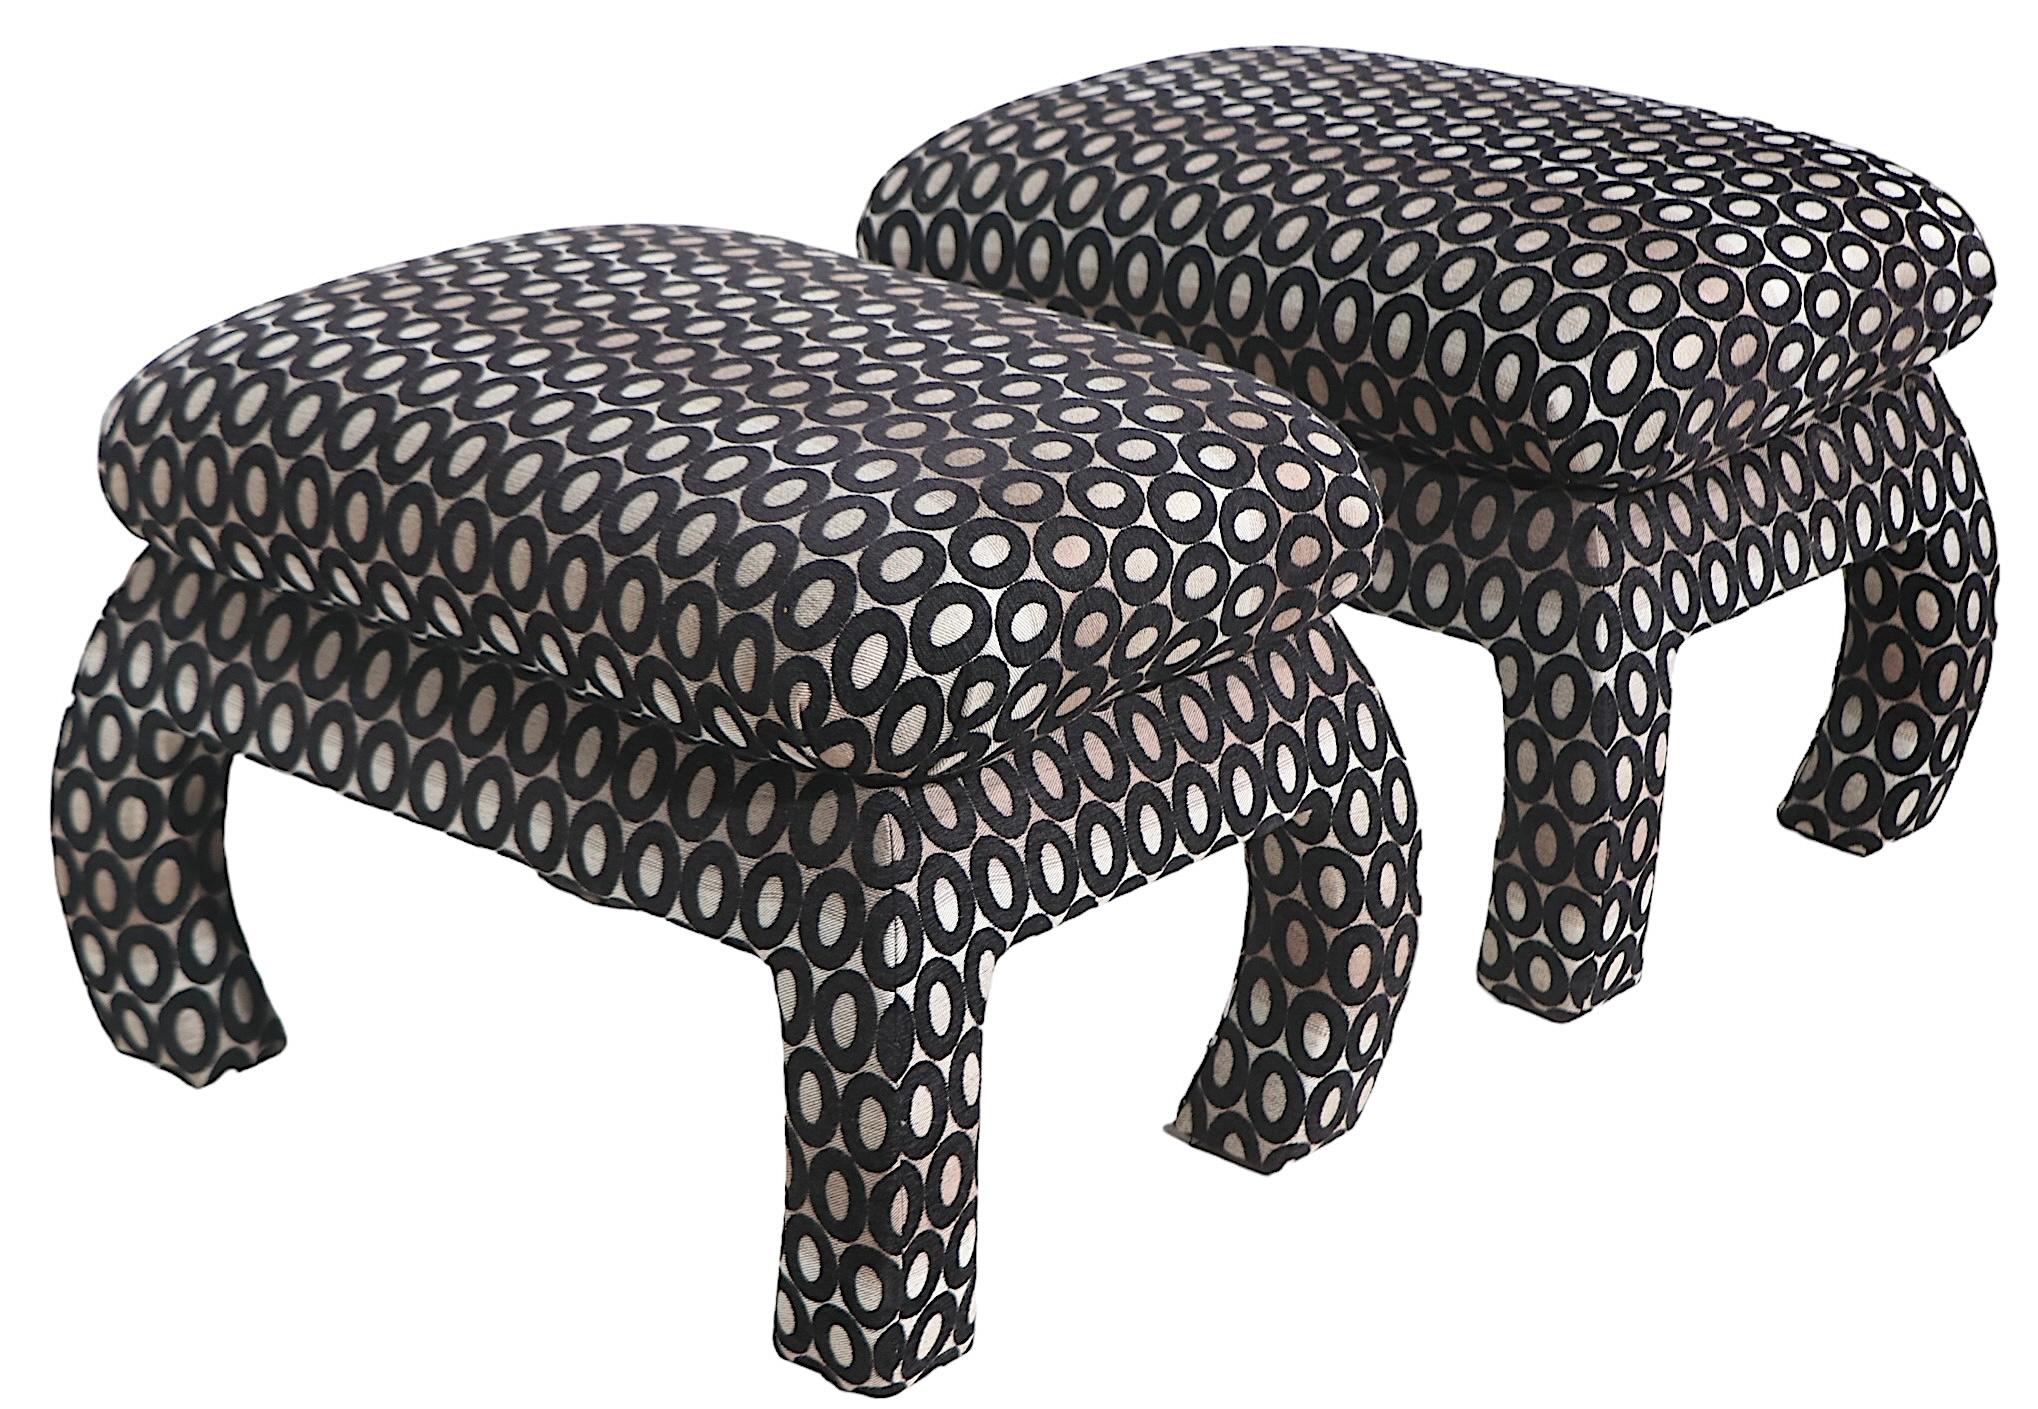 20th Century Mod Pr. of  Upholstered Stools Ottomans Benches c 1970/1980's  For Sale